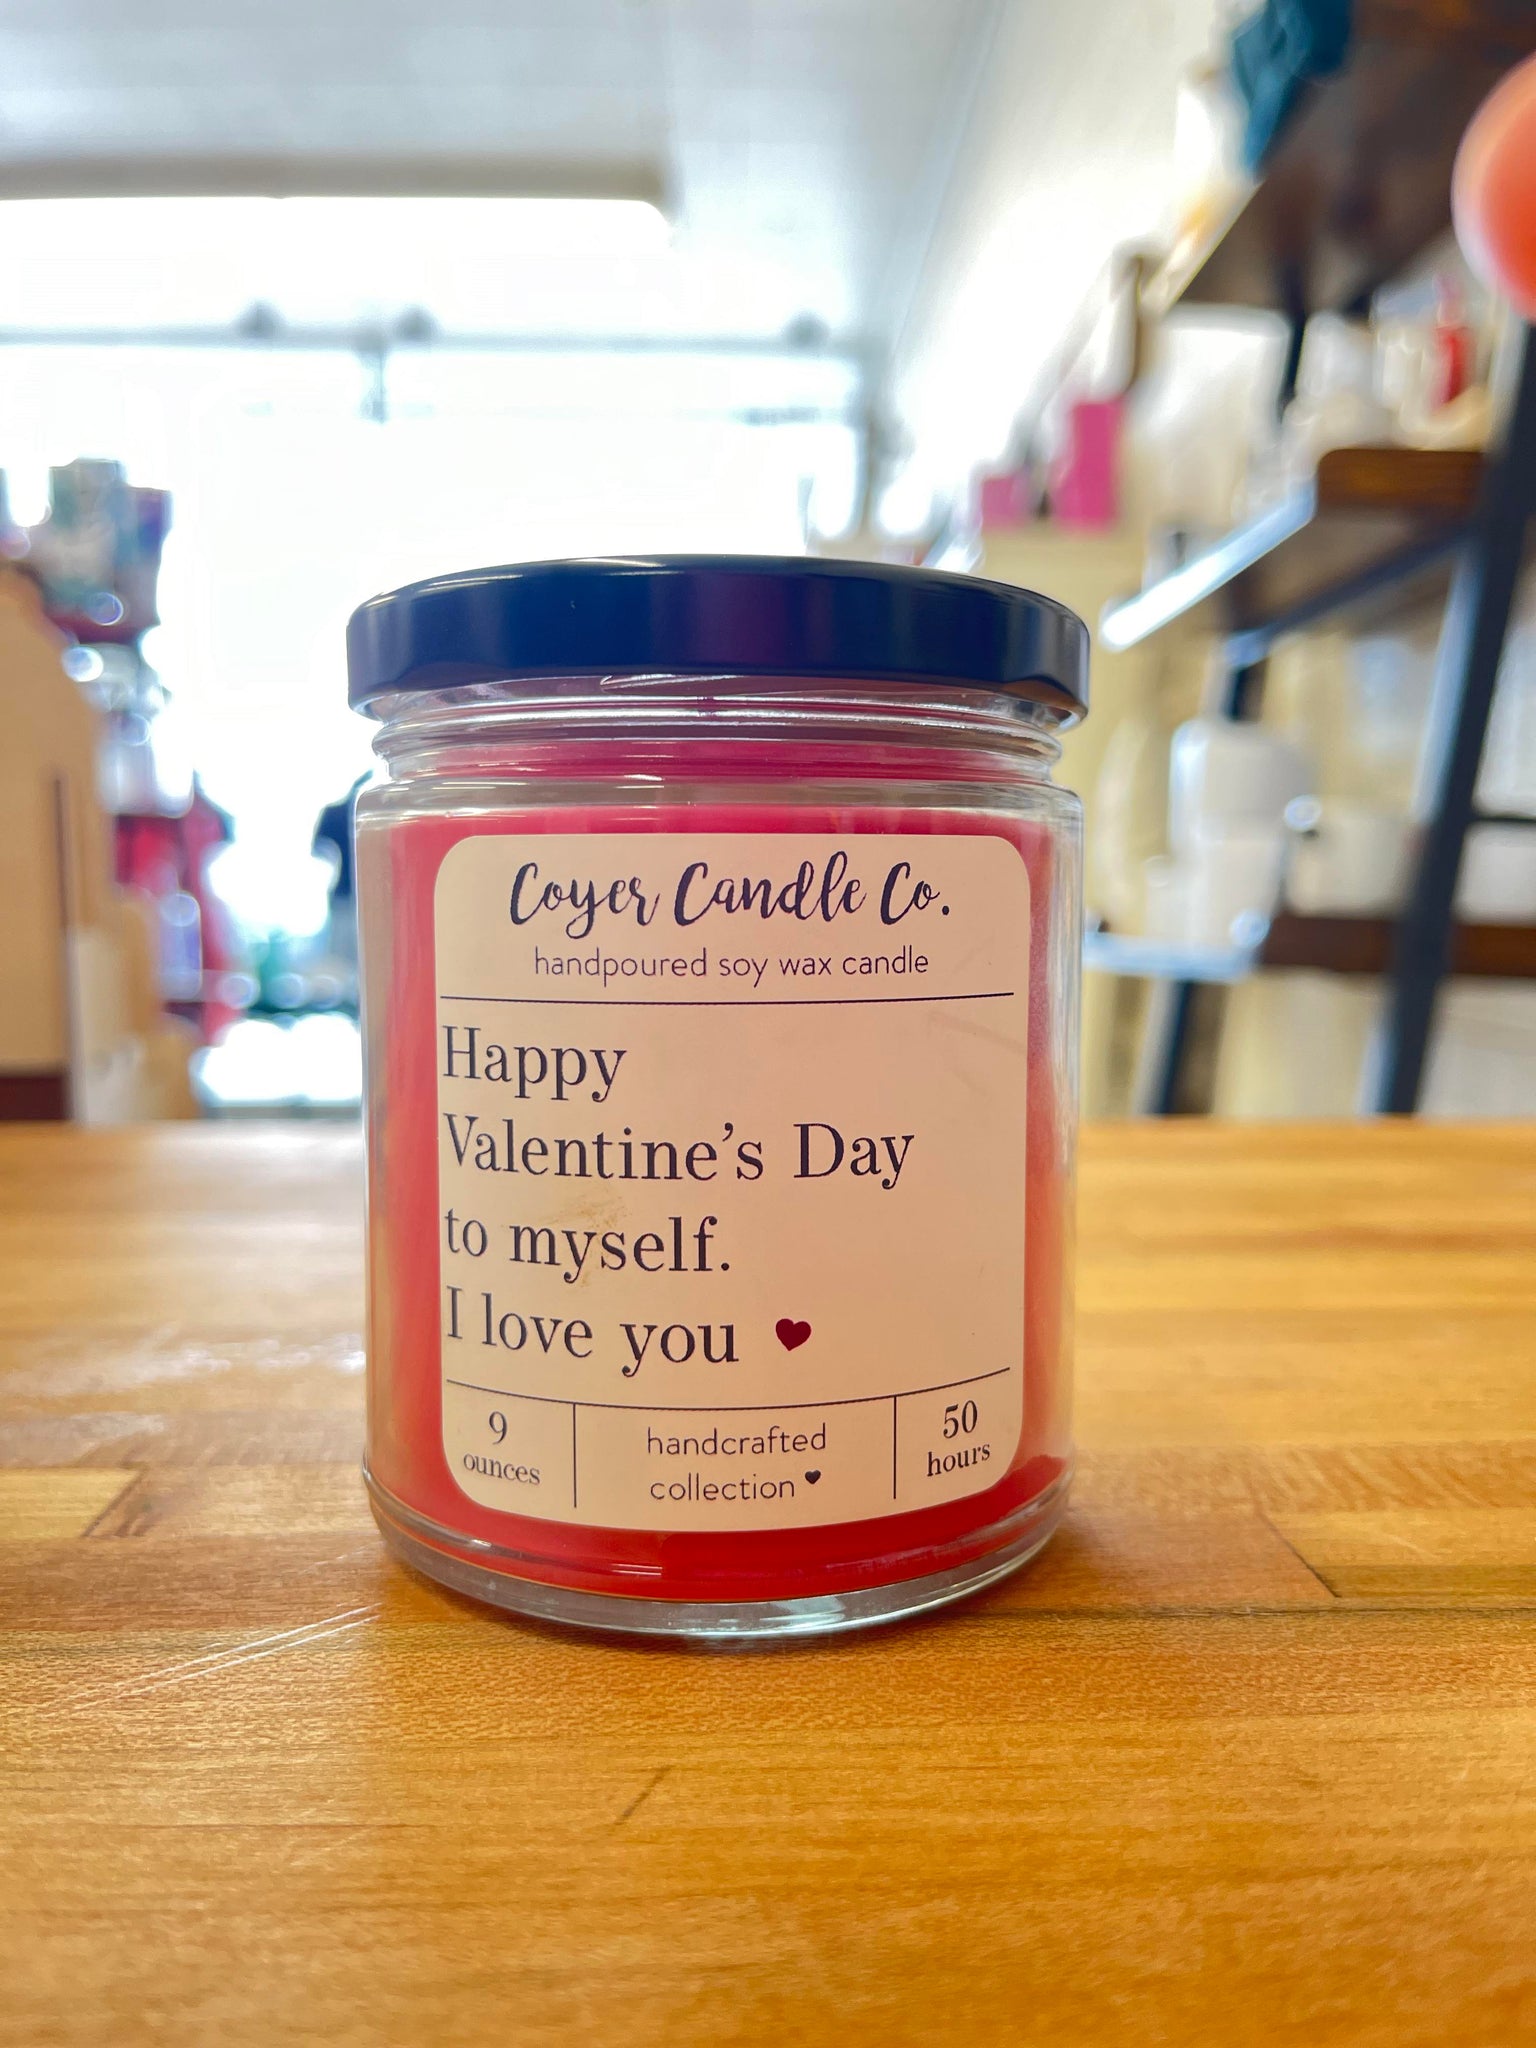 Coyer Candle Co. - 9 oz. Candles - Happy Valentine's Day To Myself